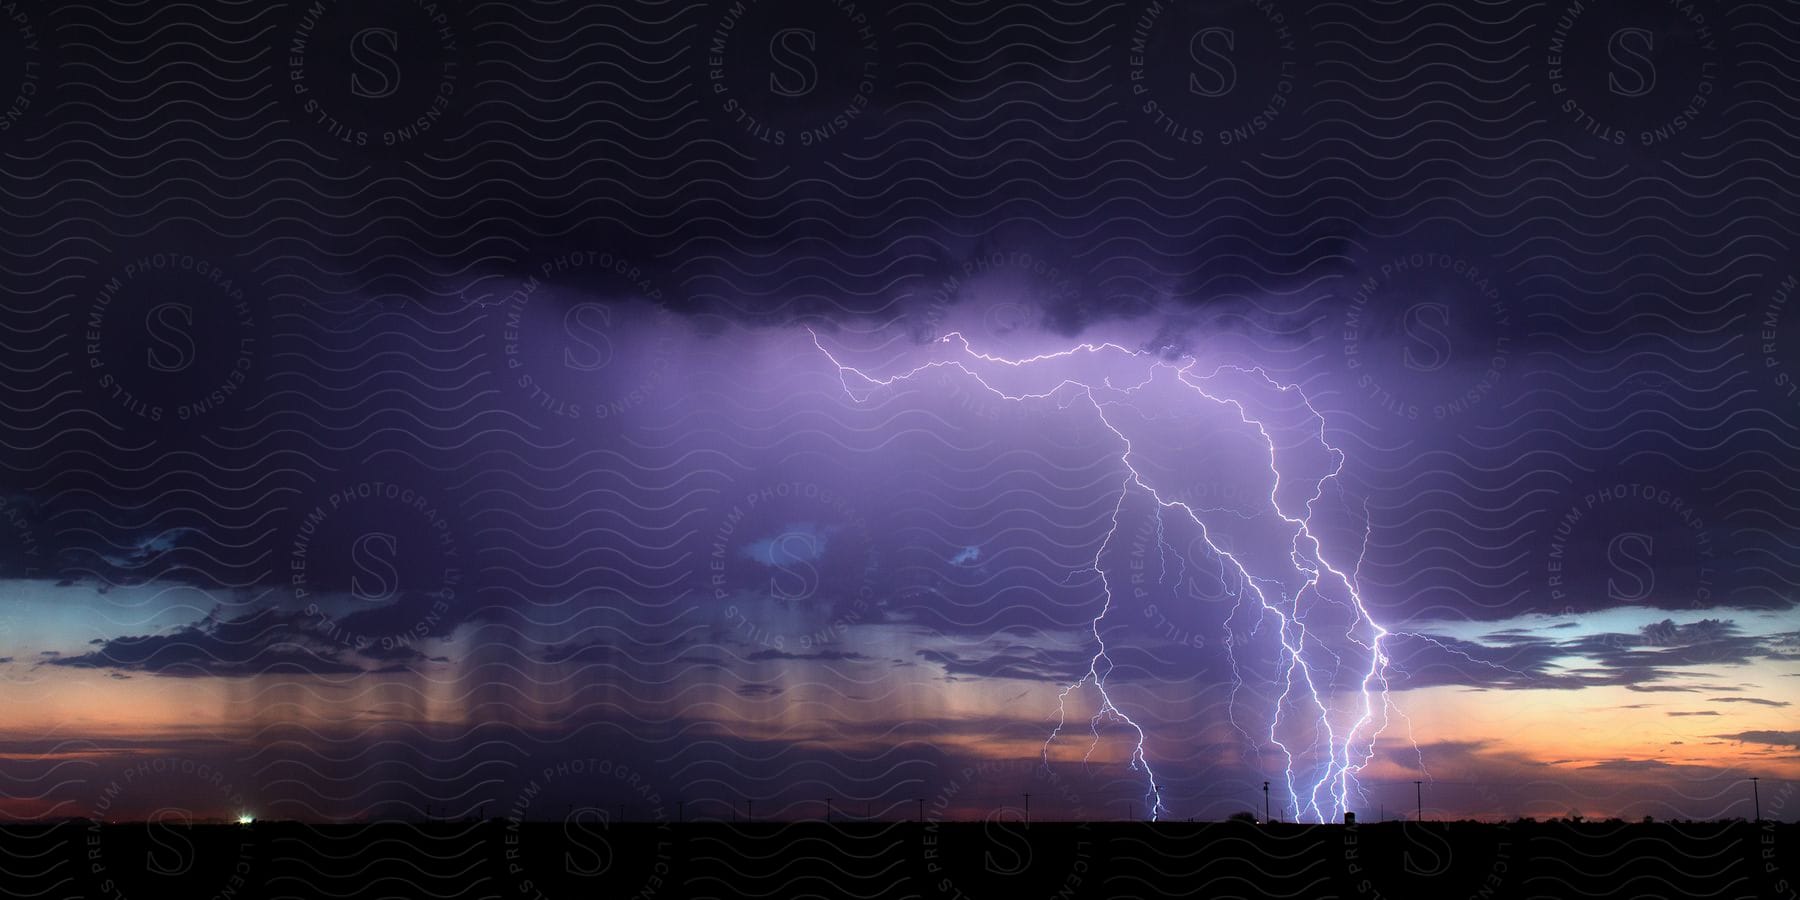 A stunning thunderstorm with dancing lightning strikes